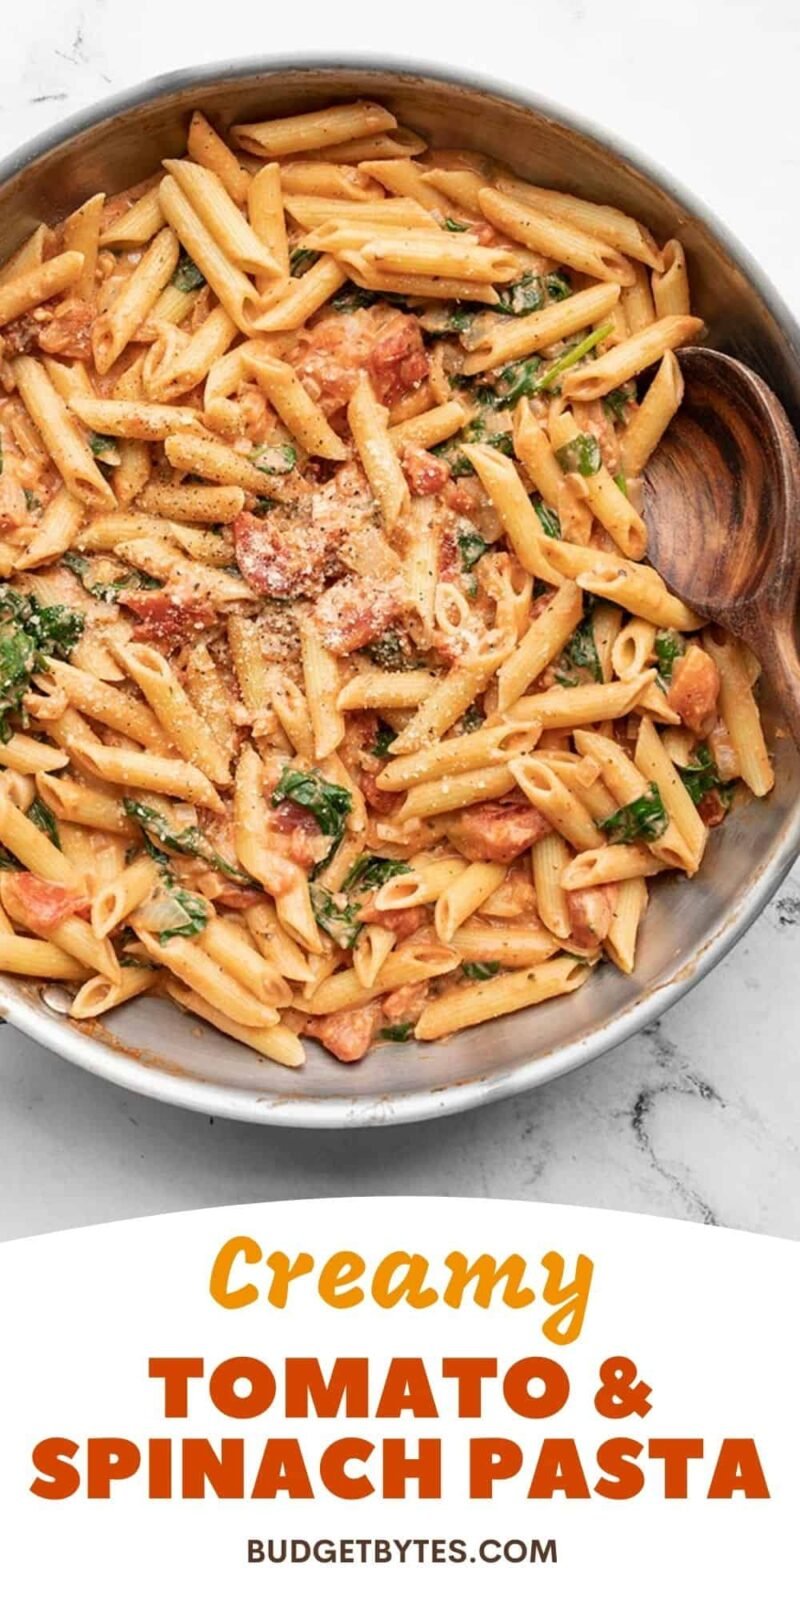 creamy tomato spinach pasta in a skillet, title text at the bottom